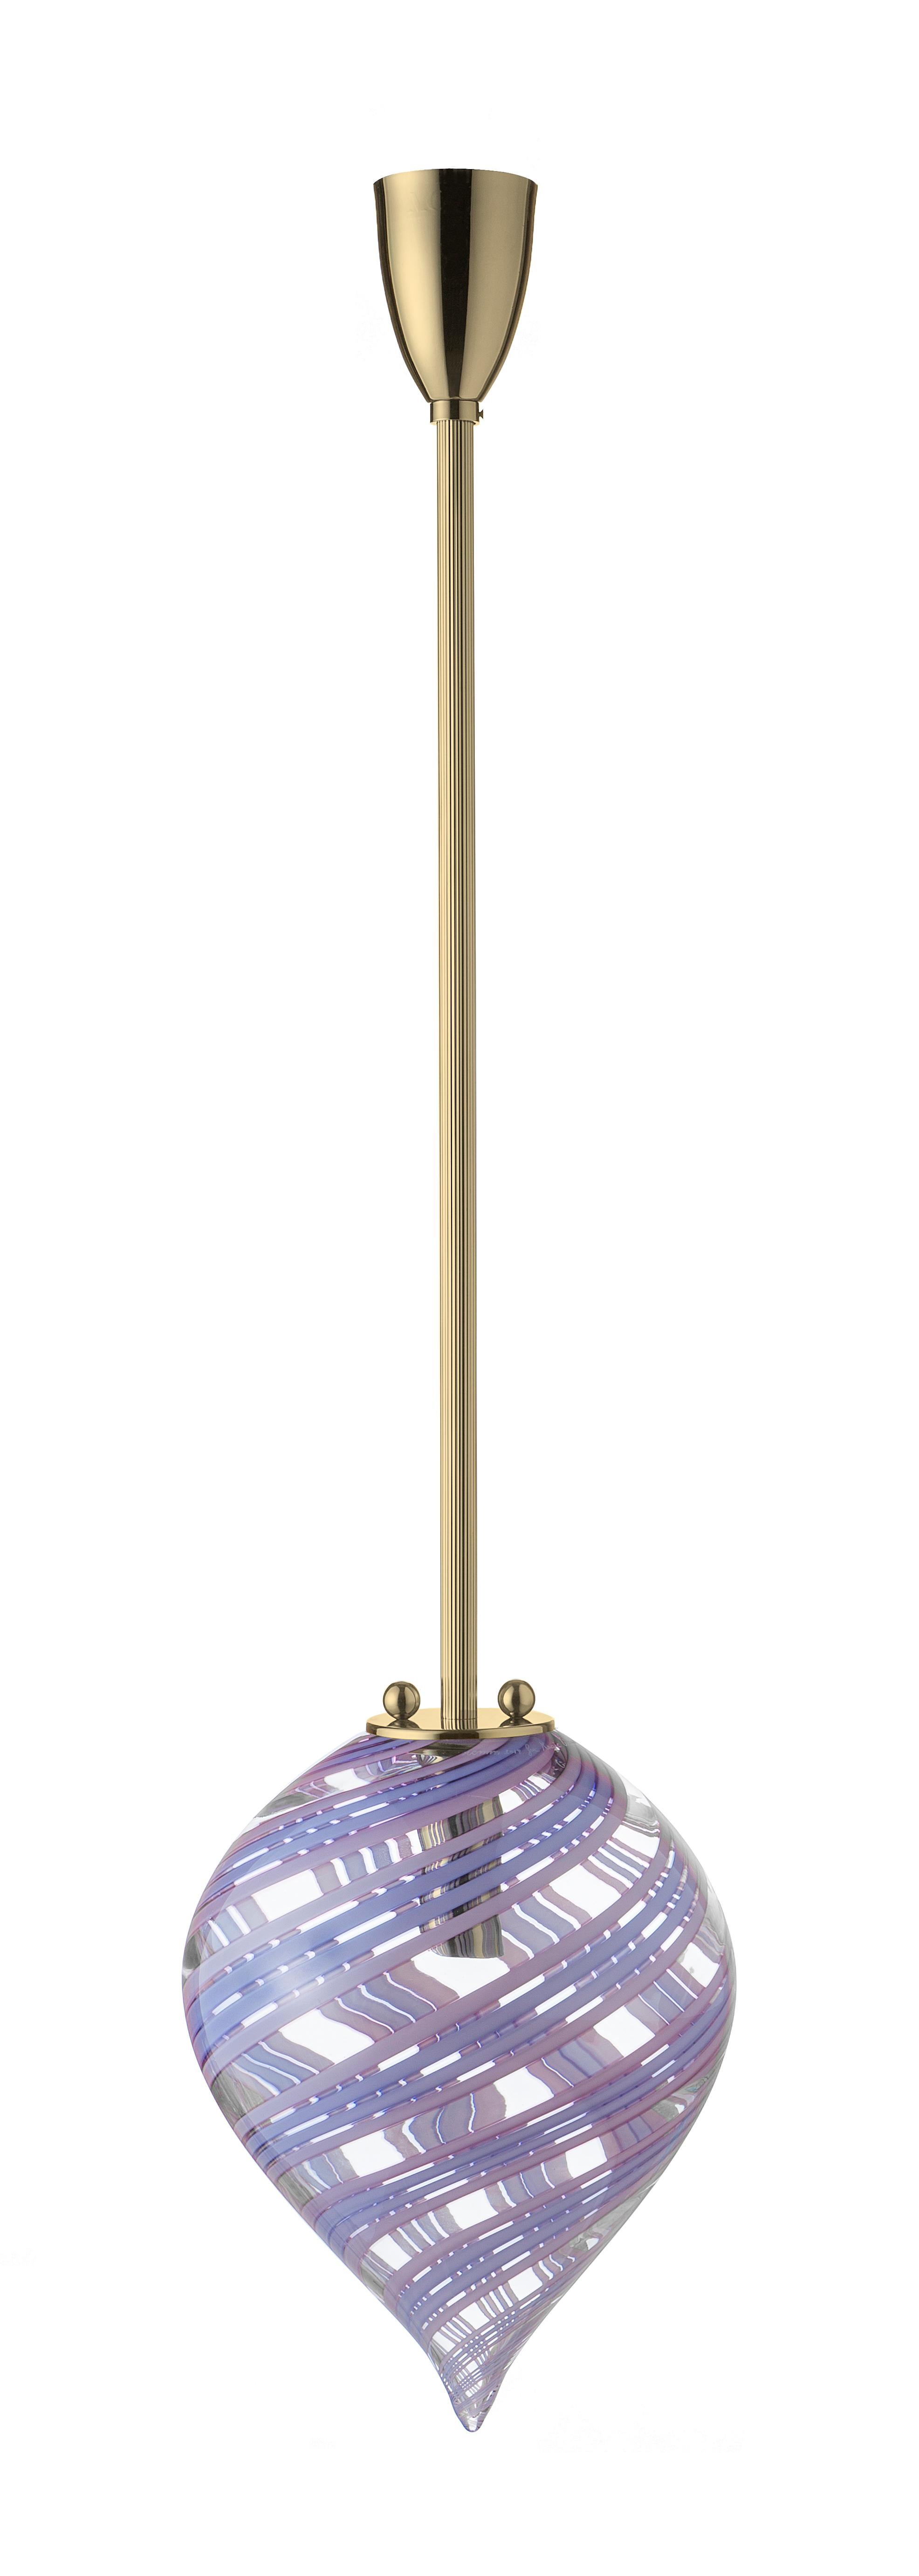 Viola pendant balloon canne by Magic Circus Editions
Dimensions: H 36 x W 27 x D 27 cm
Materials: fluted brass, mouth-blown glass
Colour: viola

Available finishes: Brass, nickel
Available colours: rosa rosso, senape bianco, blu, senape